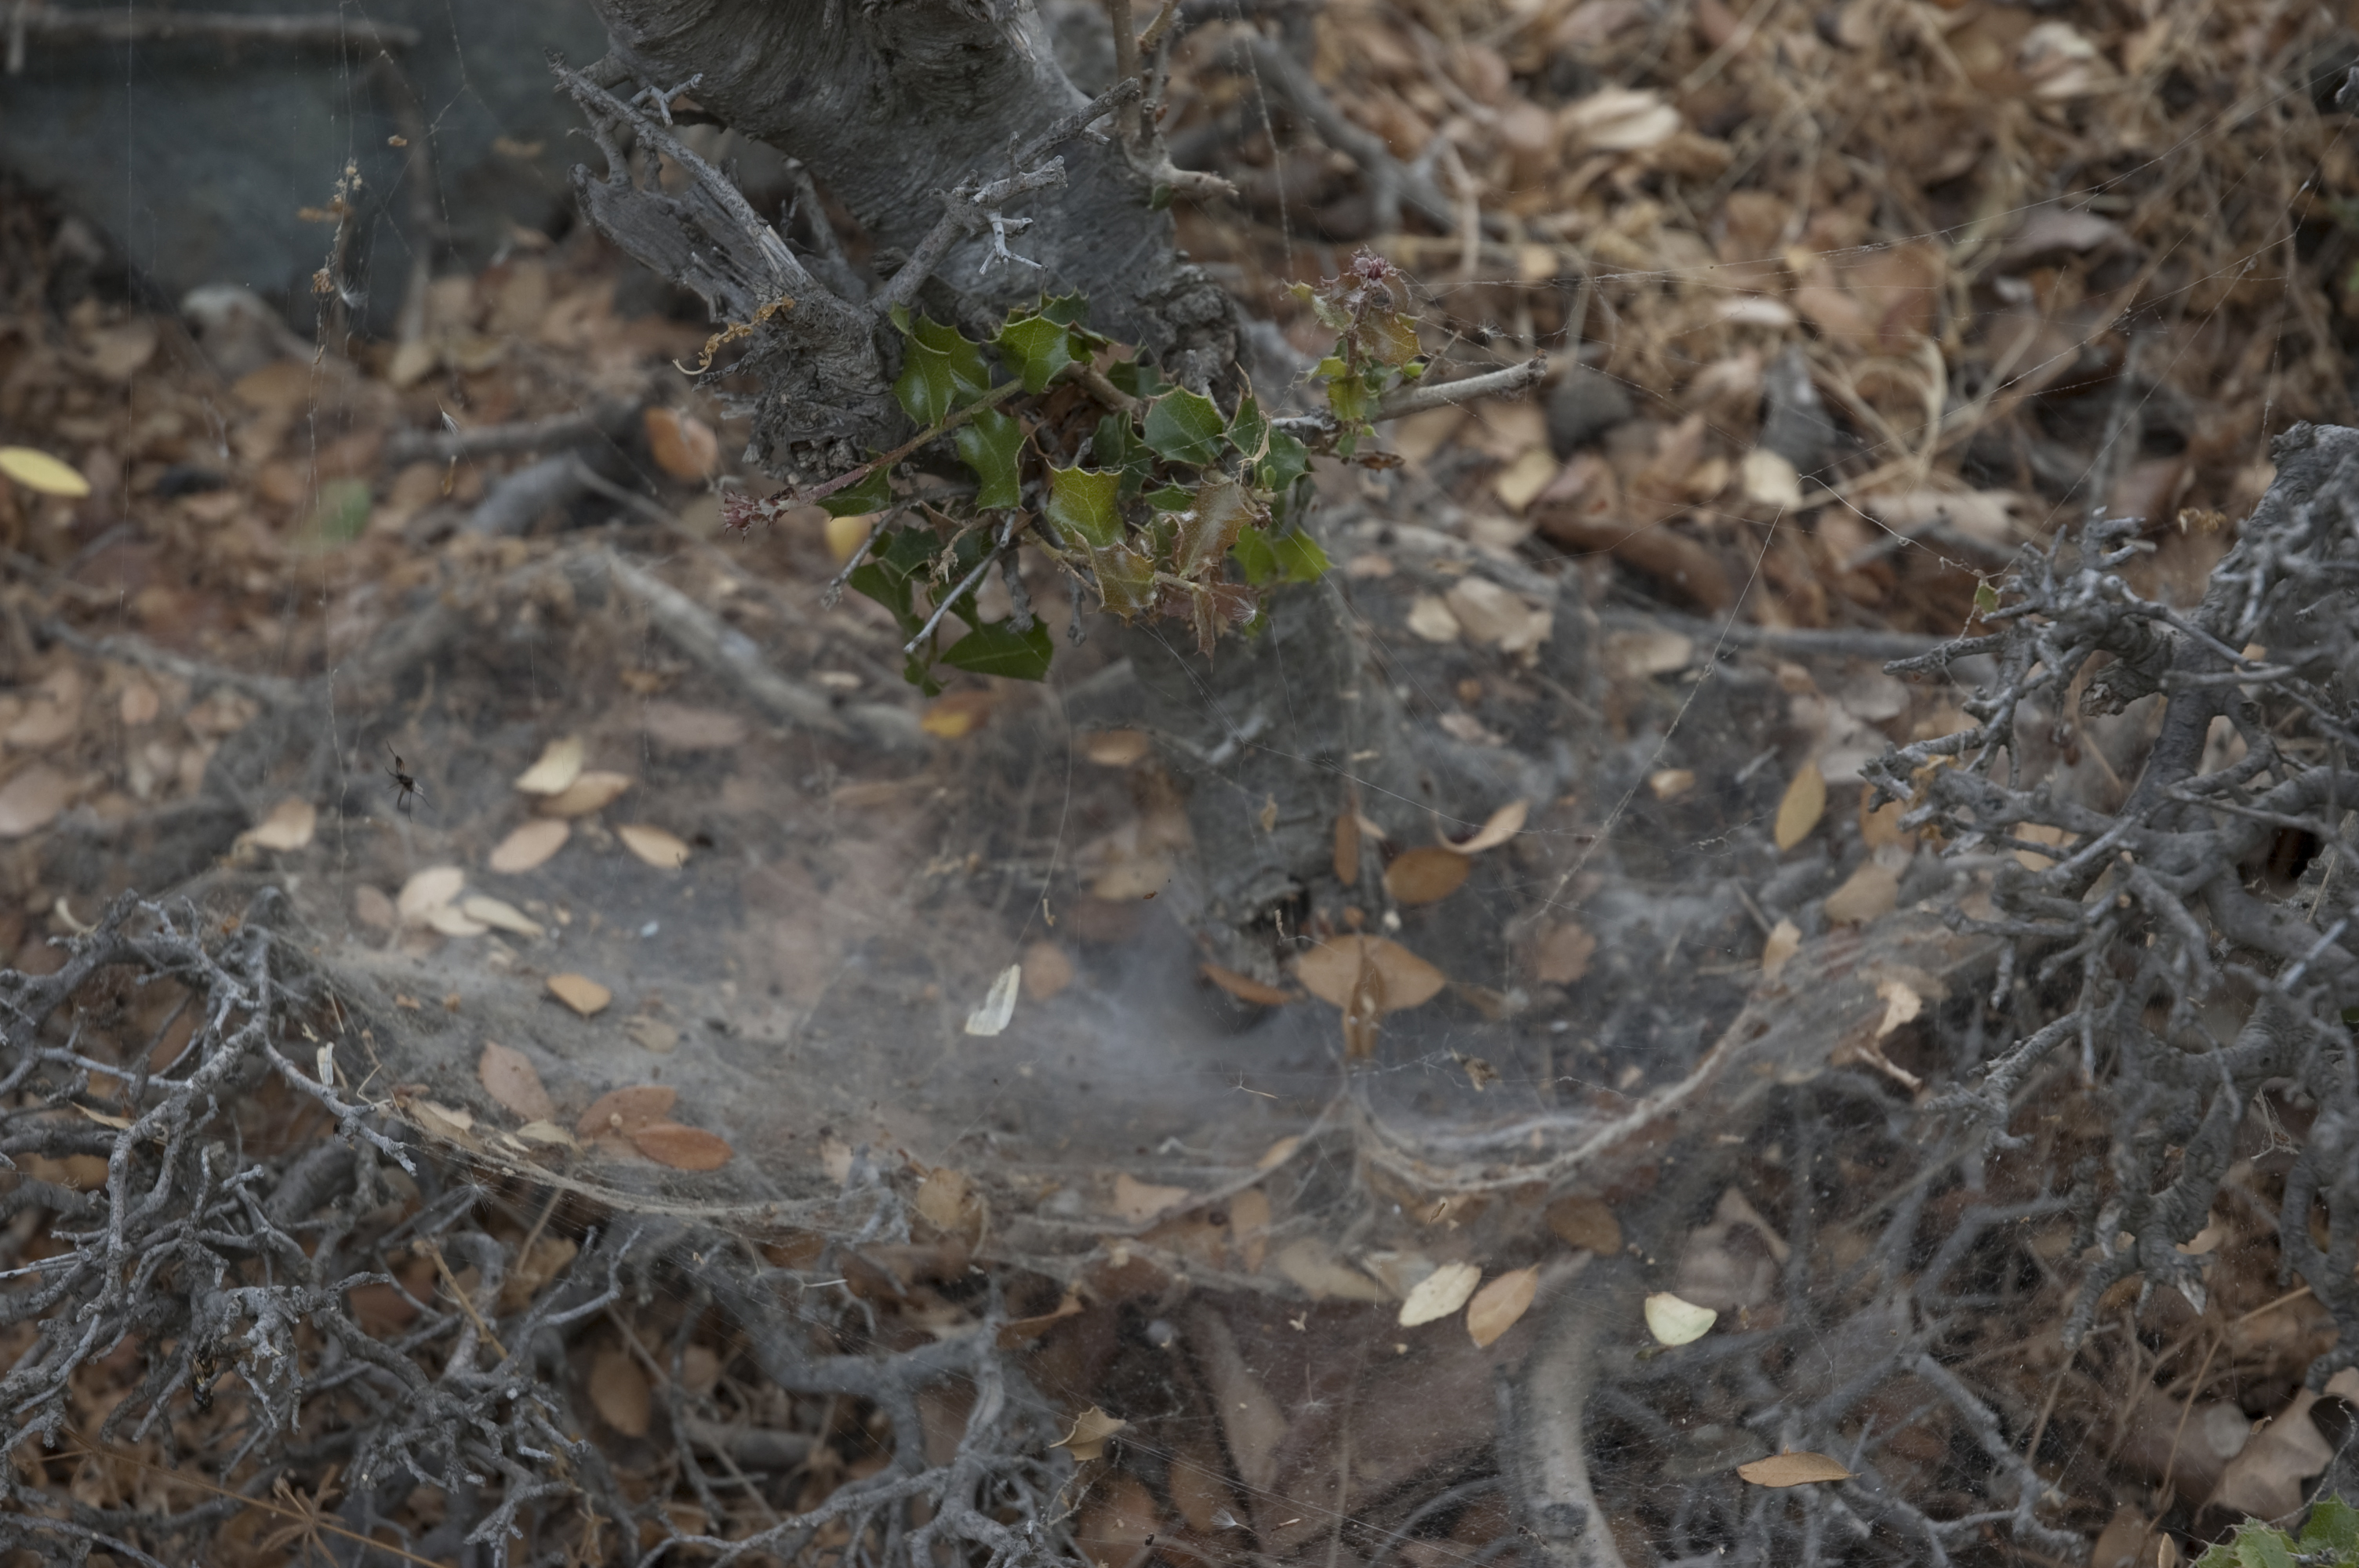 One of the many spider dens that are all around the site